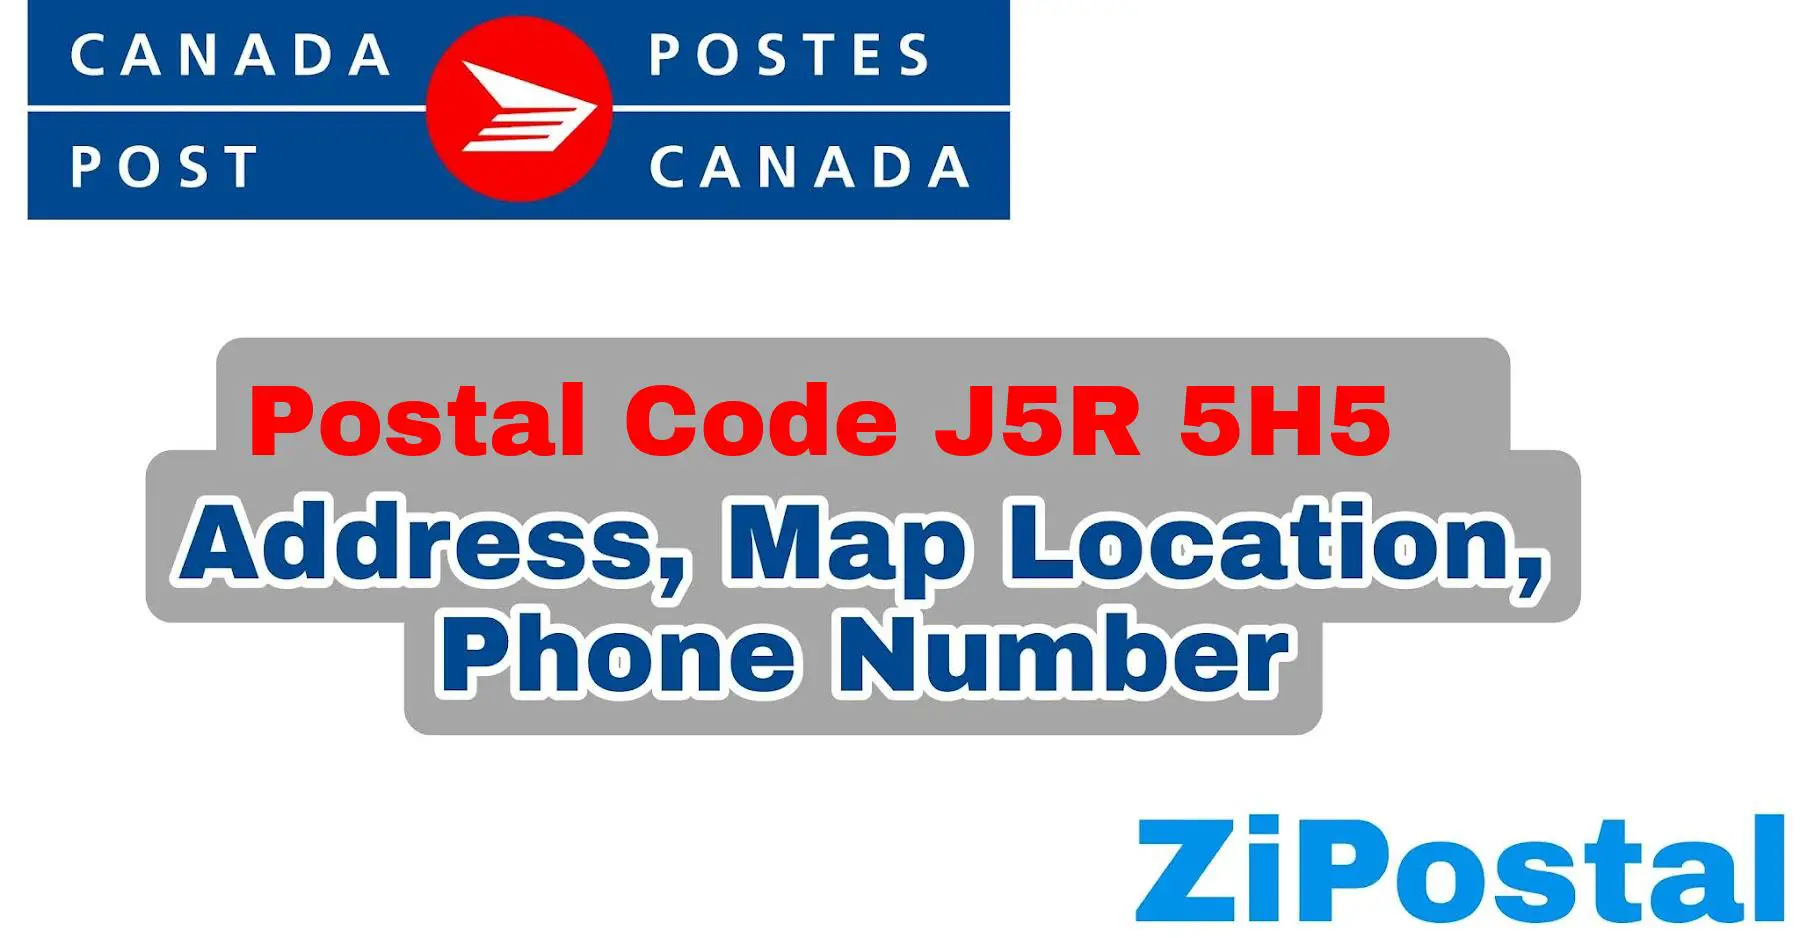 Postal Code J5R 5H5 Address Map Location and Phone Number